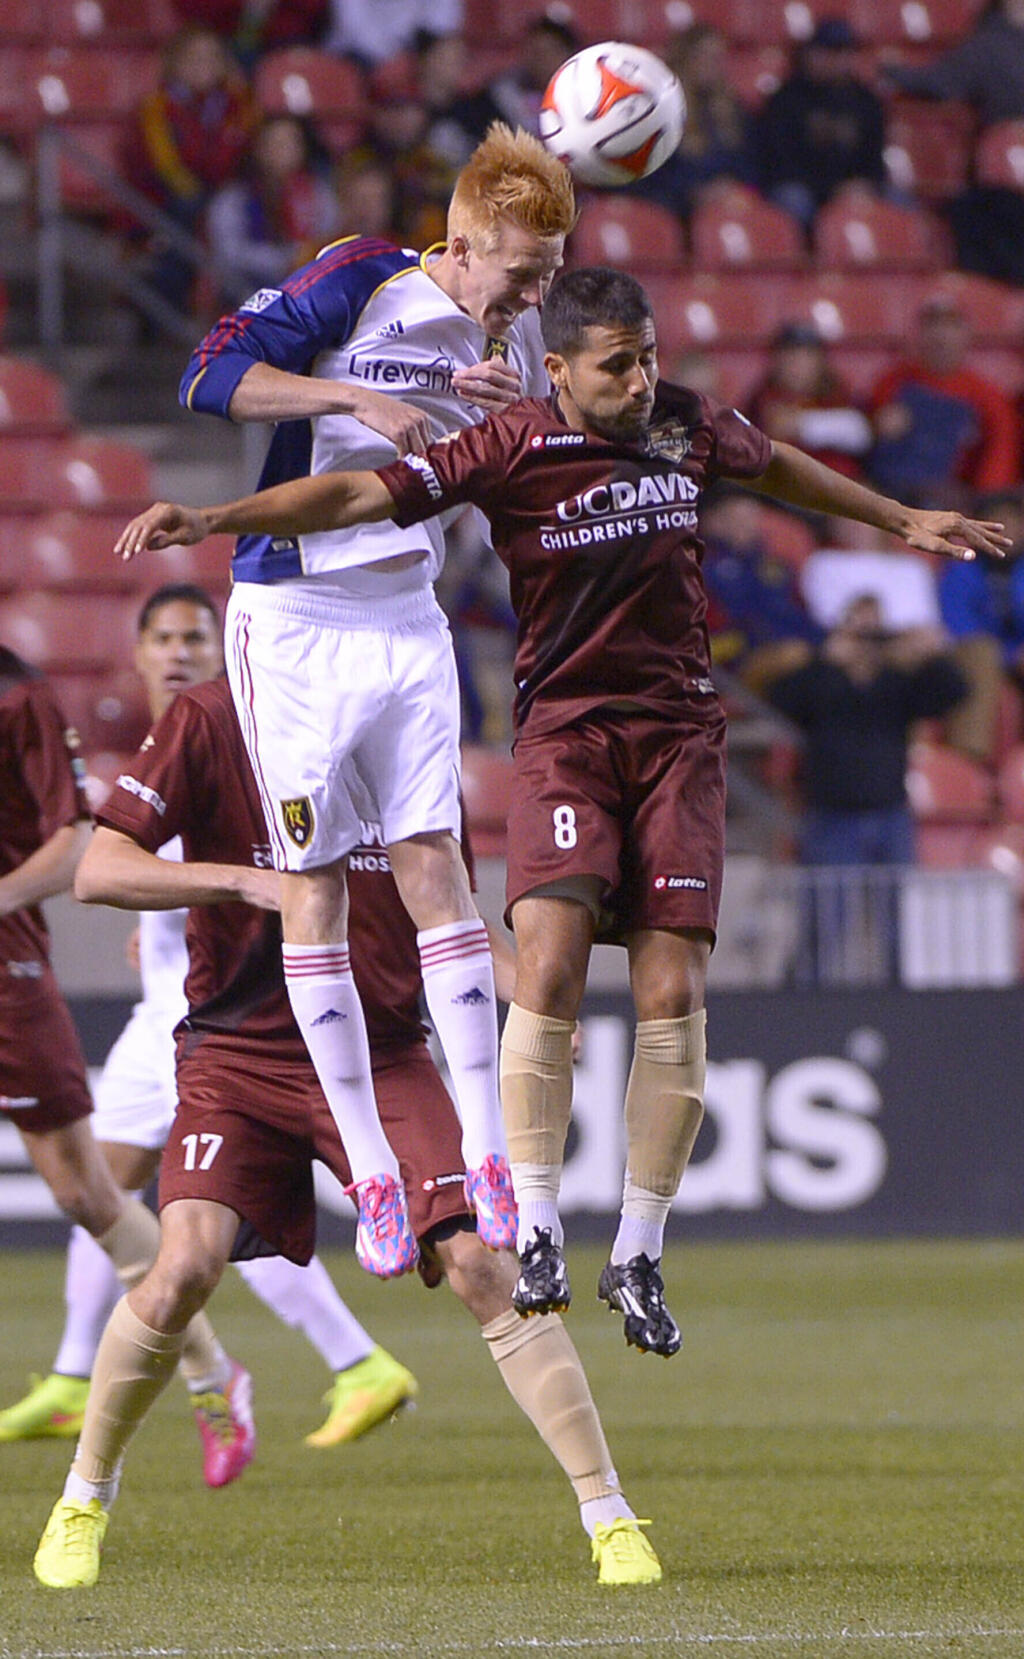 FILE - Real Salt Lake defender Justen Glad, left, and Sacramento Republic FC midfielder Rodrigo Lopez (8) make a header during an exhibition game at Rio Tinto Stadium in Sandy, Utah, Tuesday, Sept. 30, 2014. Rodrigo Lopez was on the field the night Sacramento Republic FC debuted as a franchise nearly a decade ago, filling venerable, old Hughes Stadium to the brim. It was a memorable night and the start of a magical season that ended with a USL championship. (Leah Hogsten/The Salt Lake Tribune via AP, File)